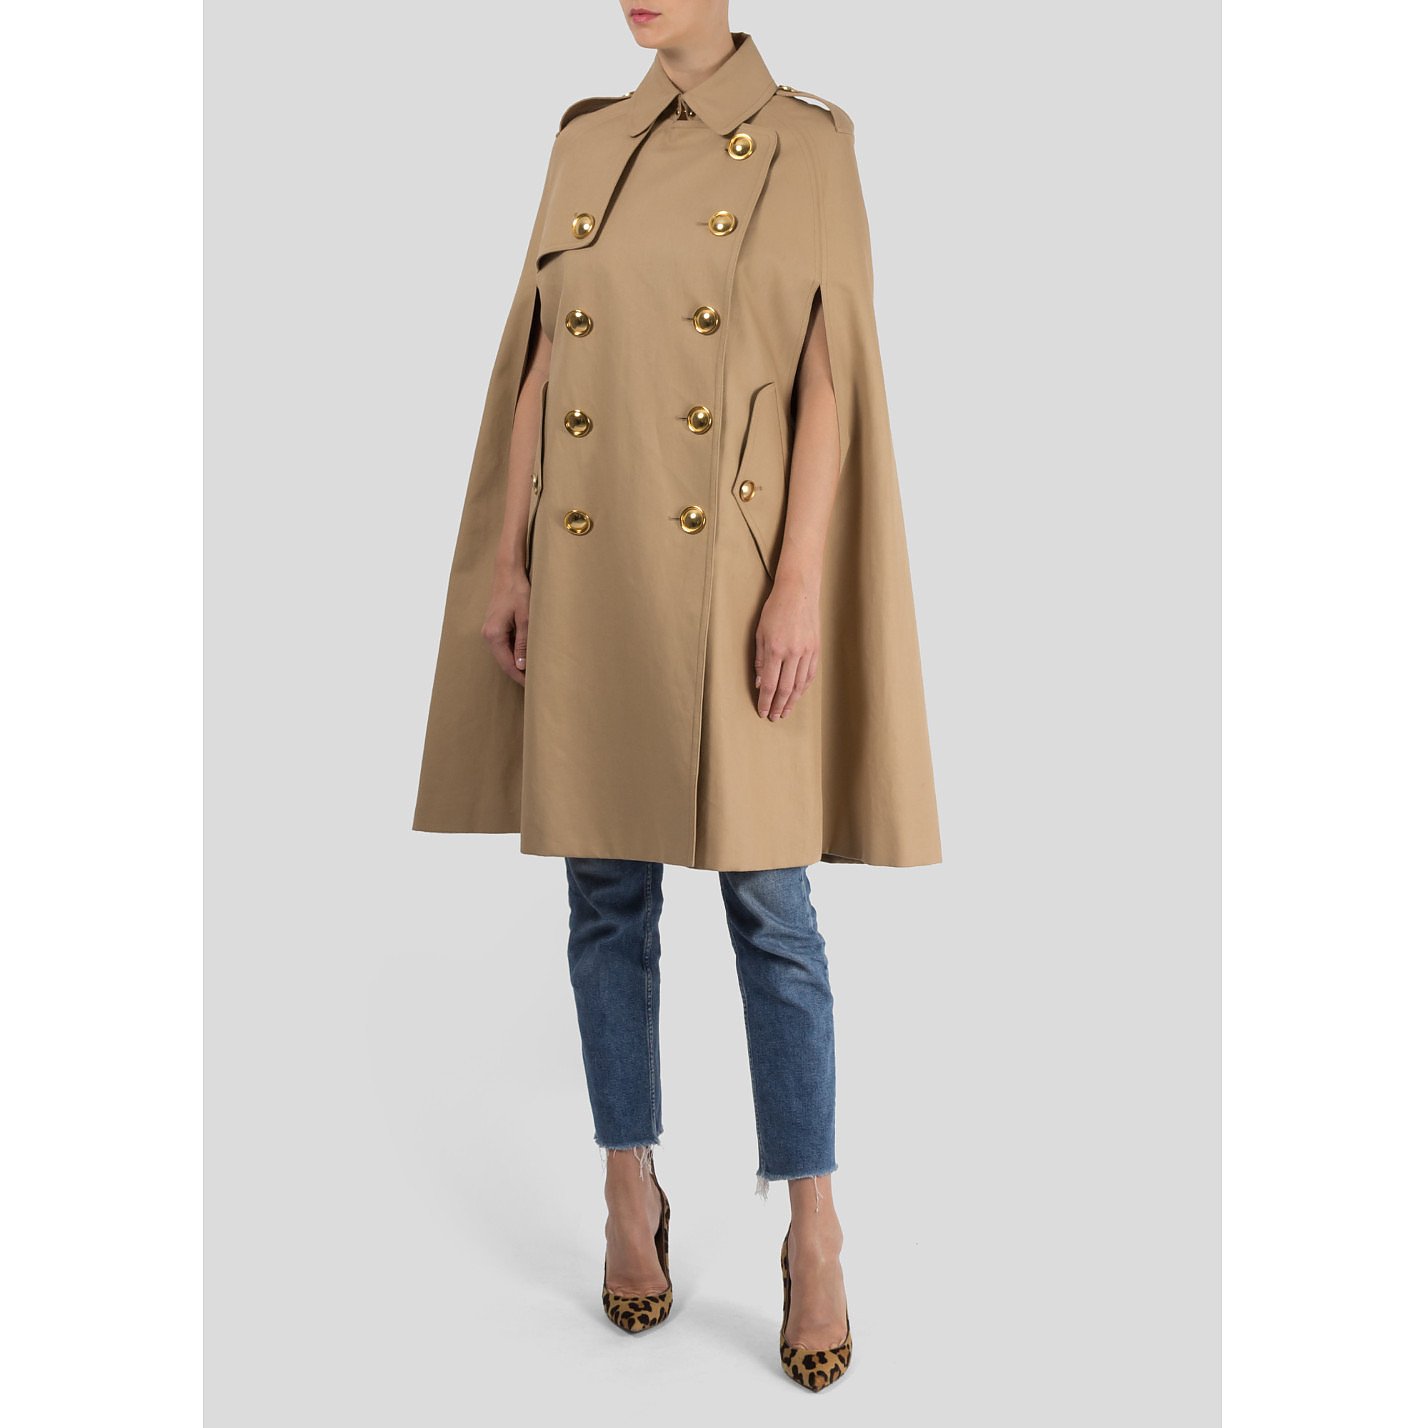 Rent or Buy Burberry Trench Cape Coat 